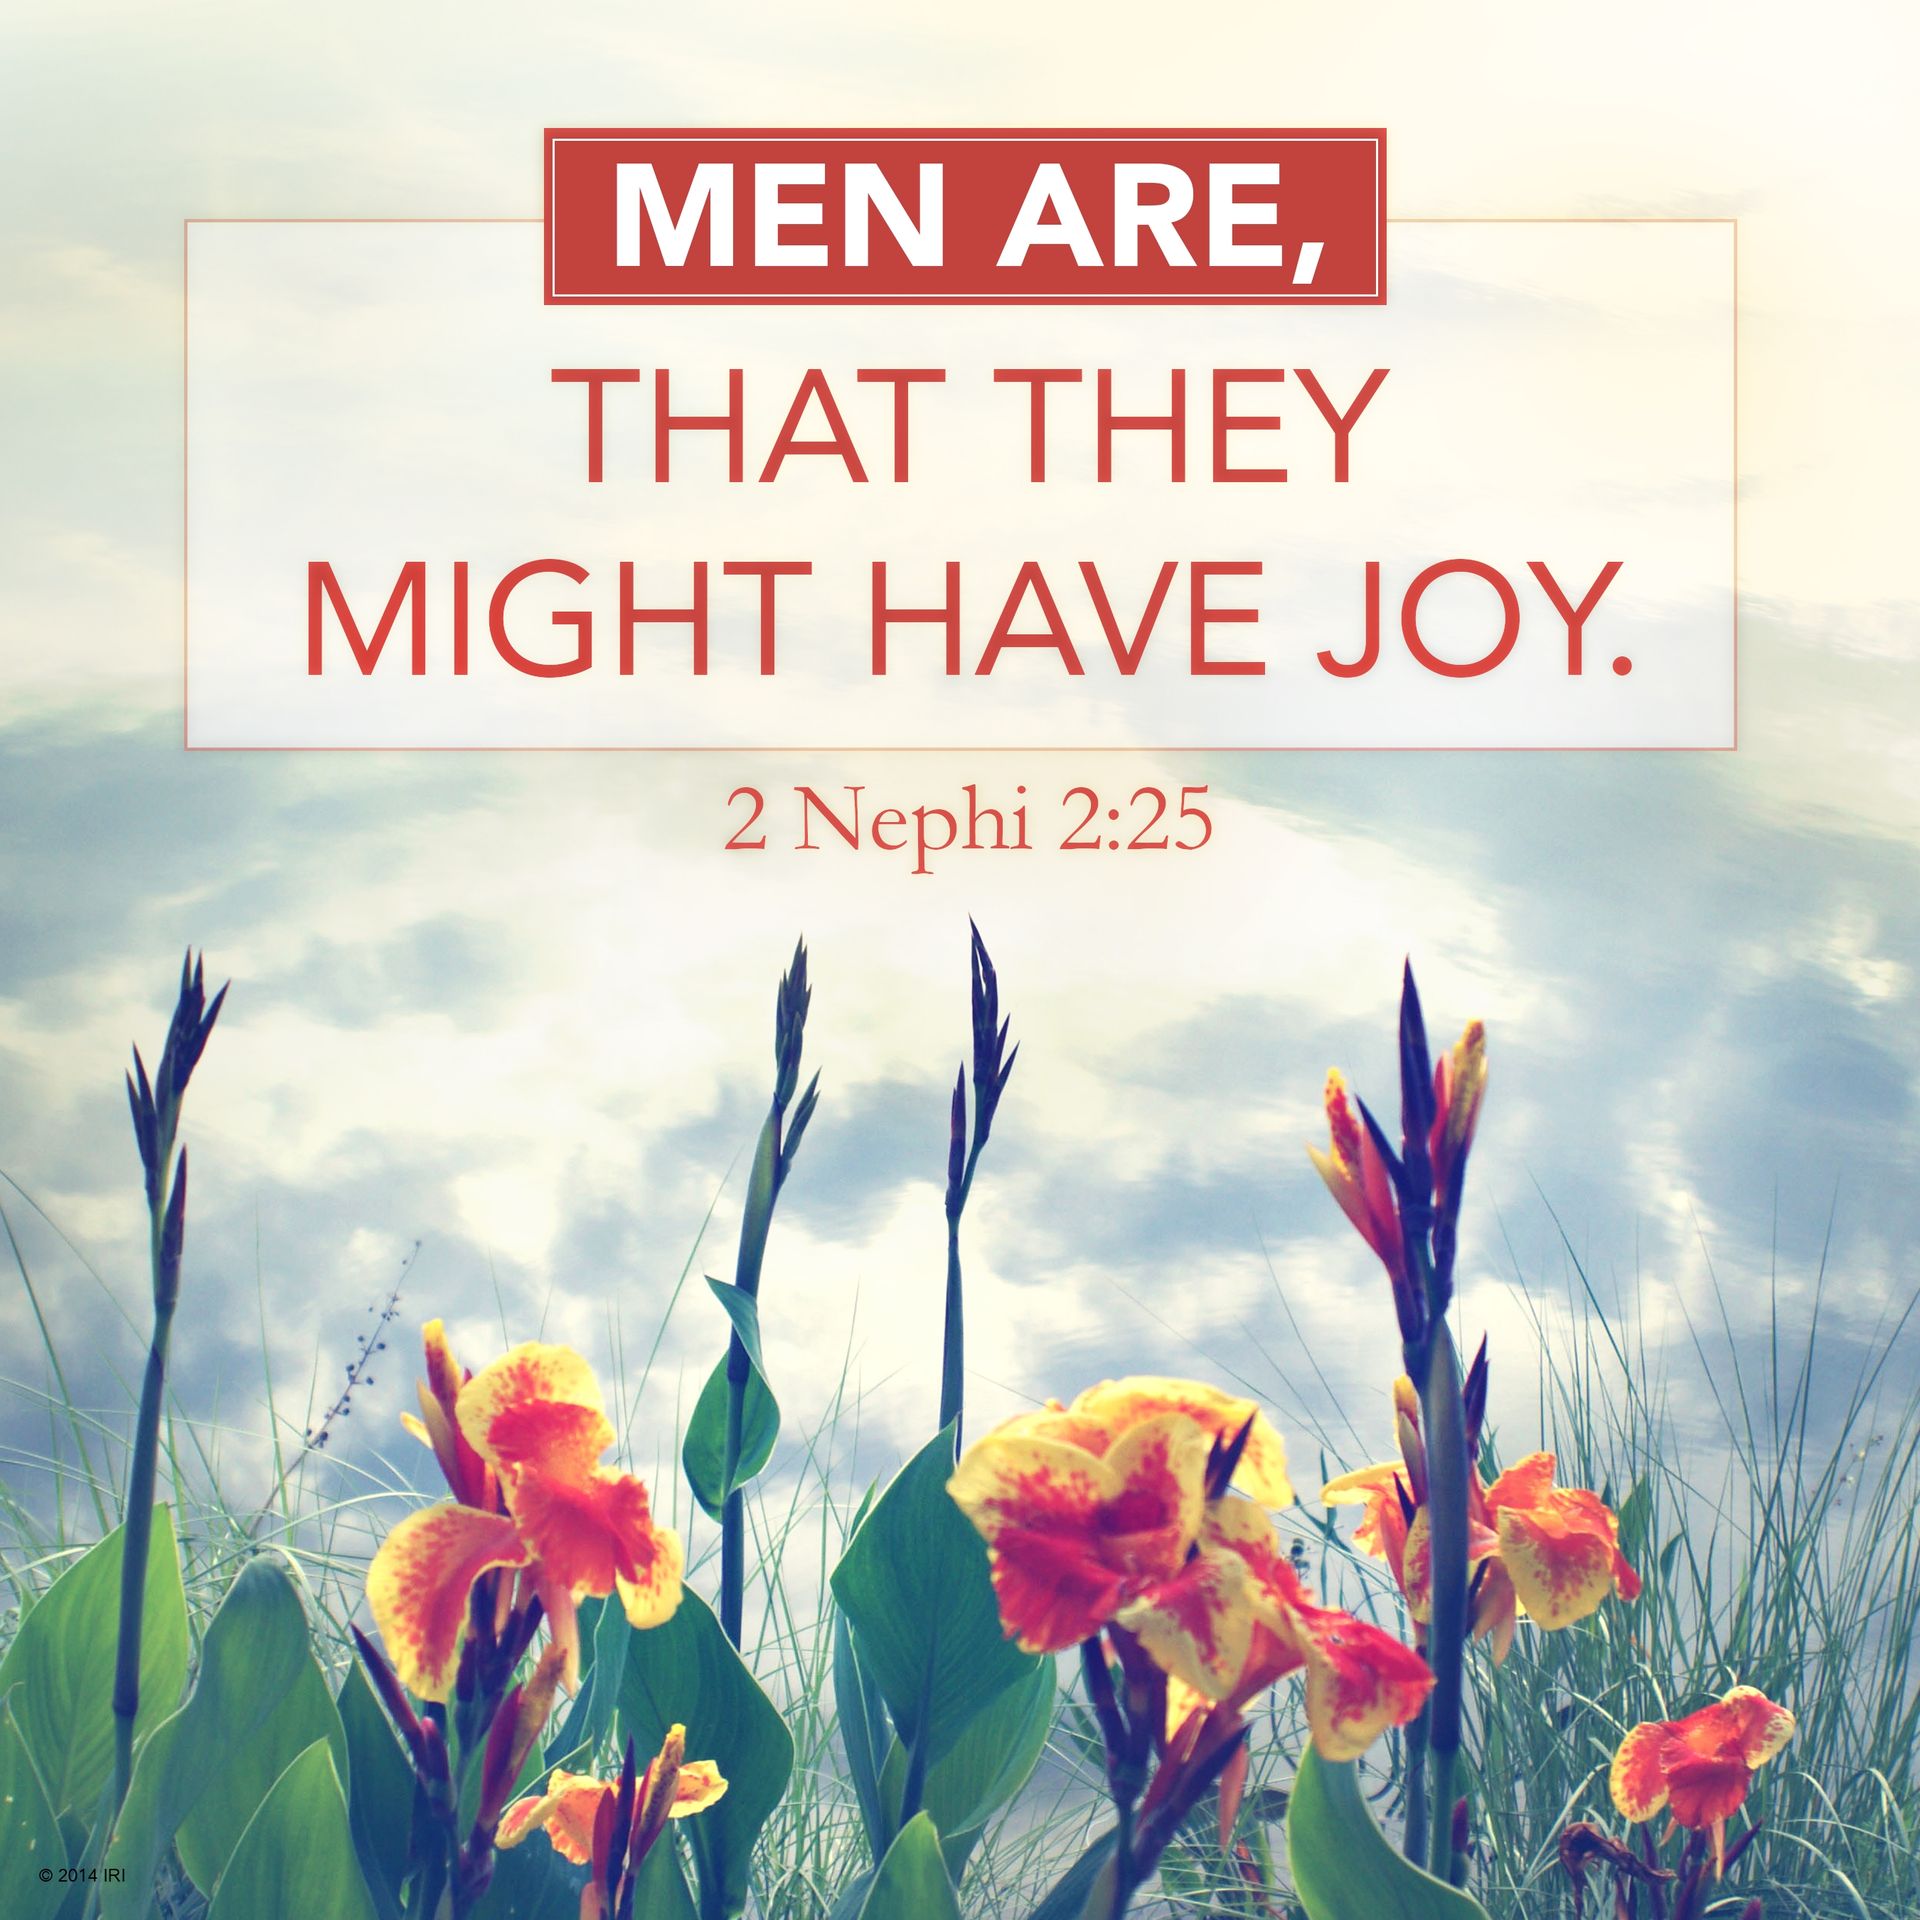 “Men are, that they might have joy.”—2 Nephi 2:25